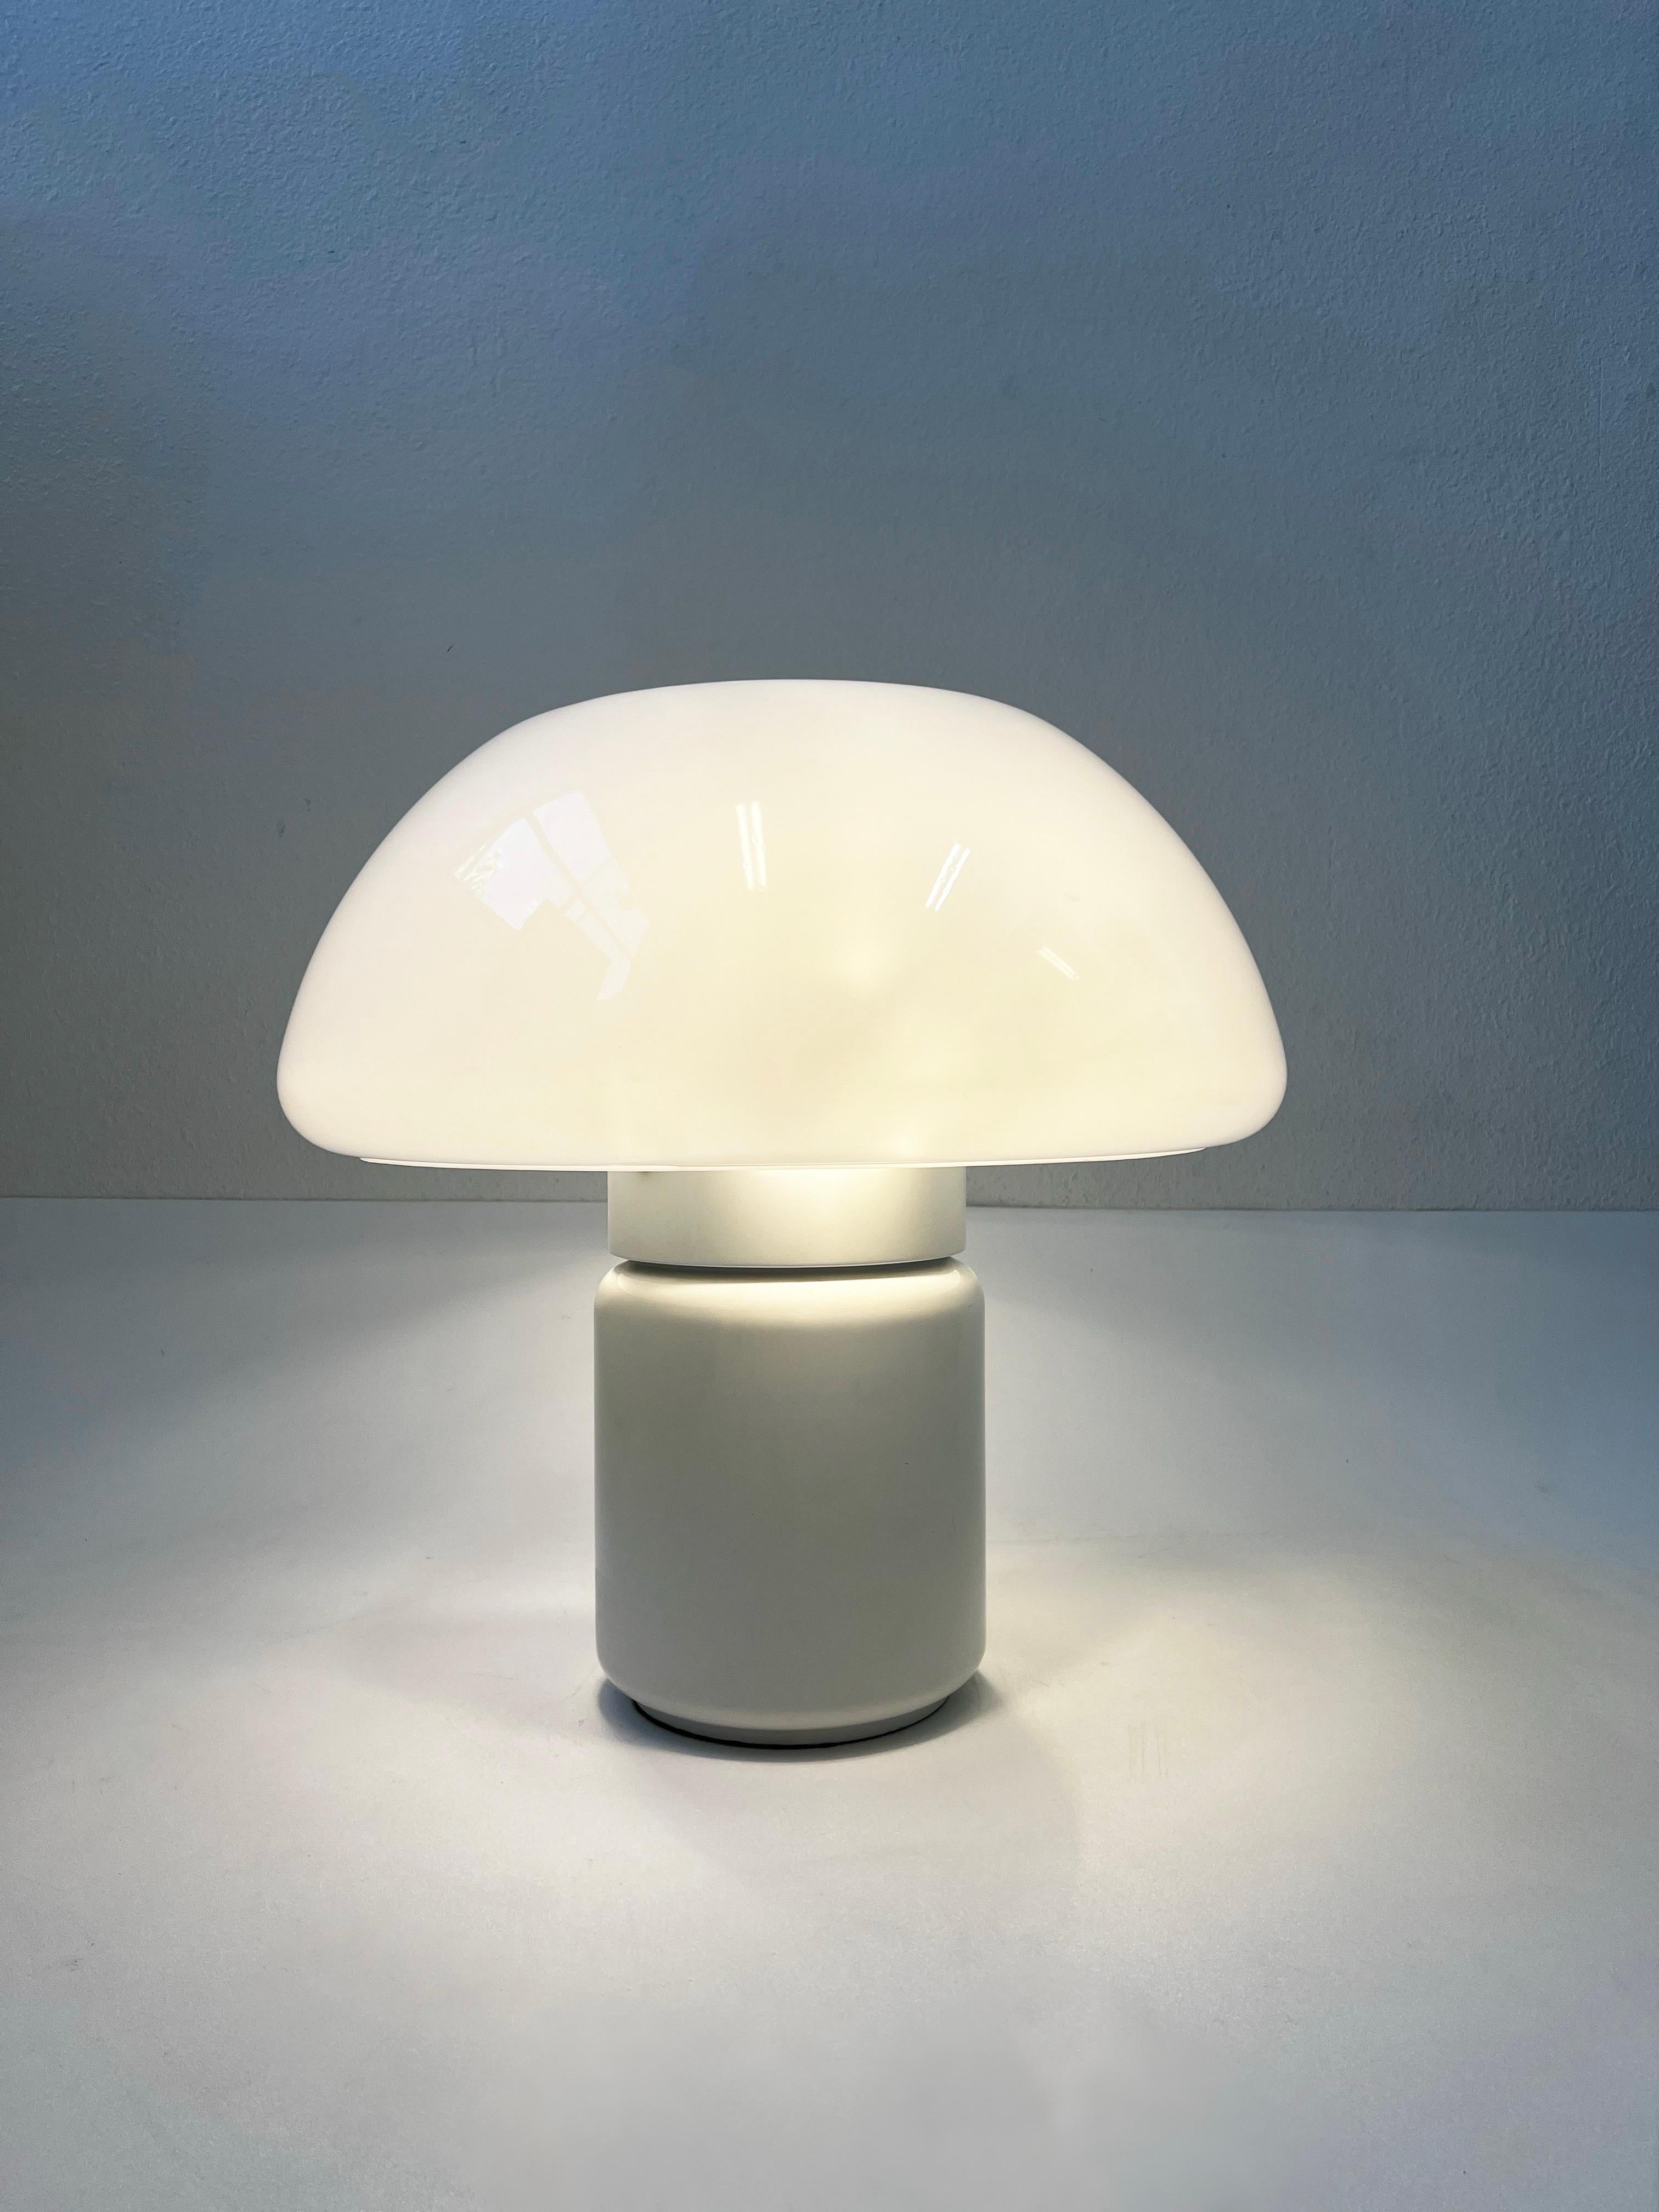 1970’s Mod 625 table lamp by Italian designer Elio Martinelli. 
Constructed of white powder coated metal with a white acrylic shade.
In original vintage condition shows minor wear consistent with age. 

Wired for US, it takes three 40w Max regular